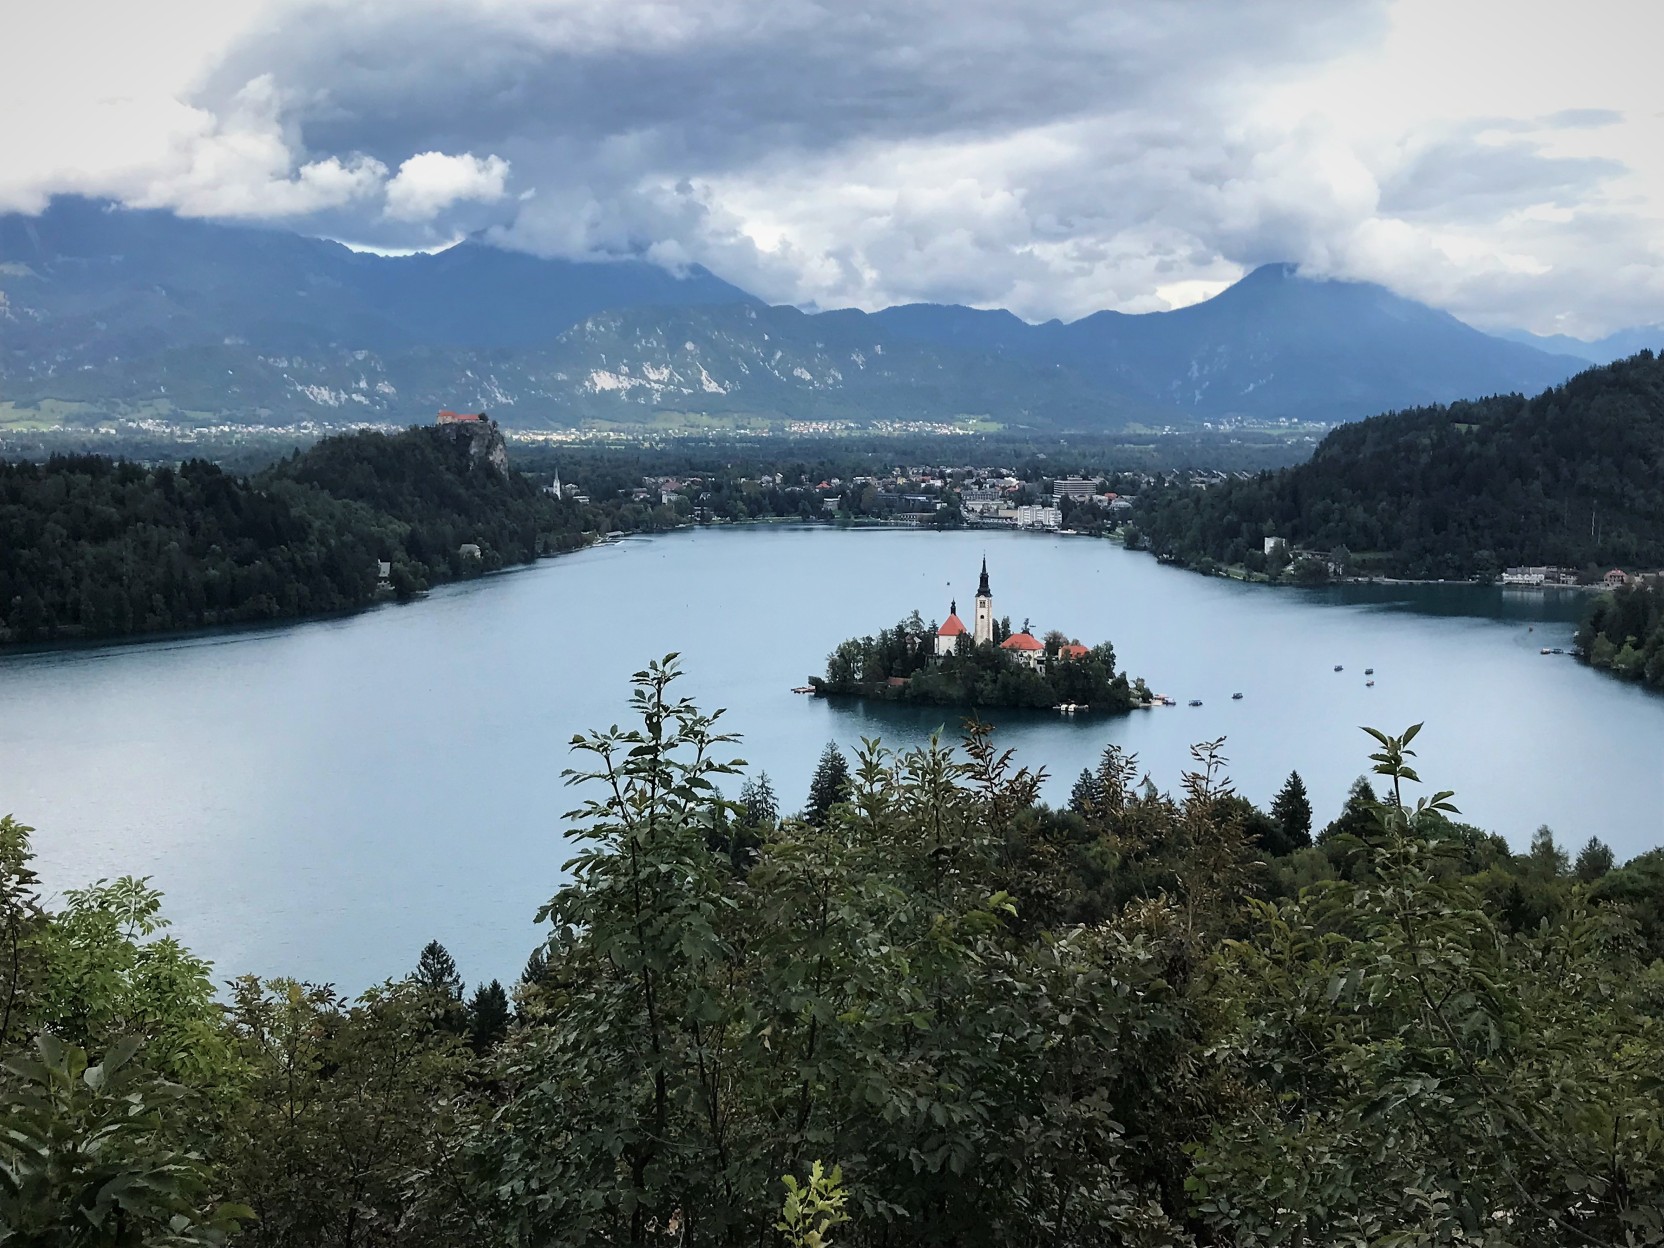 overhead shot of Lake Bled, Slovenia with island in center of lake and mountains in background